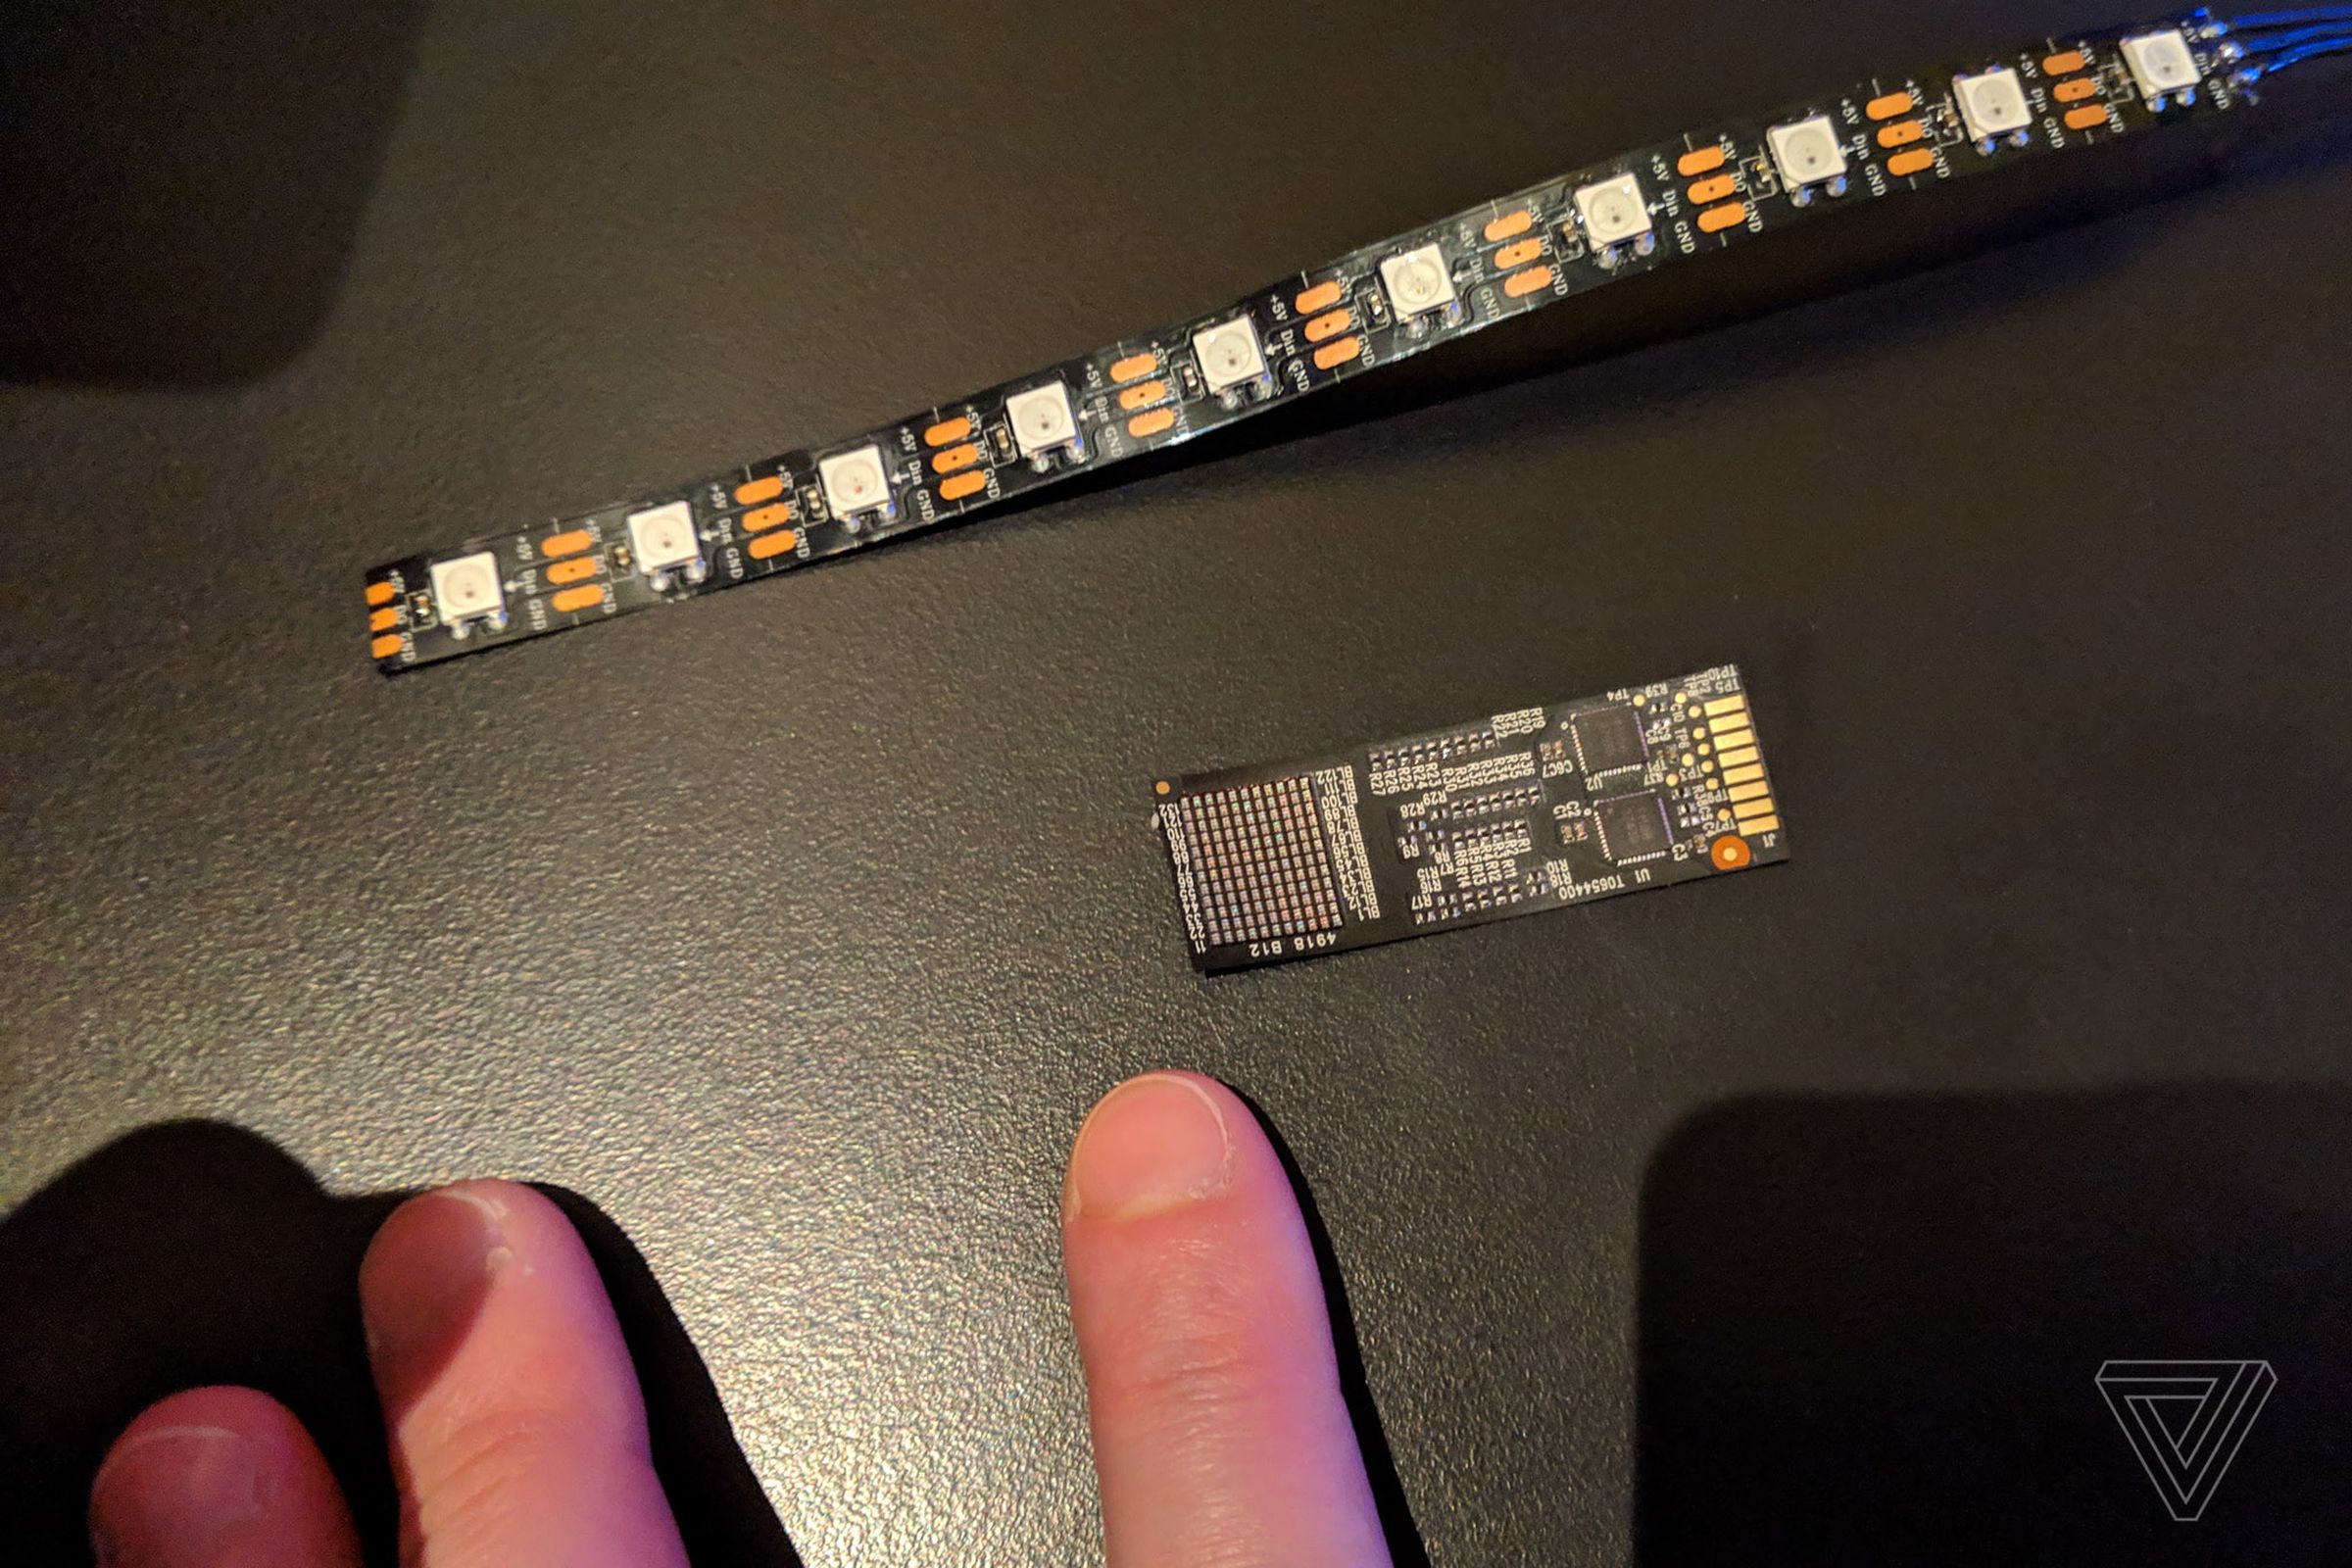 The standard RGB LED light strip, the Capellix array, and some human fingers for scale.